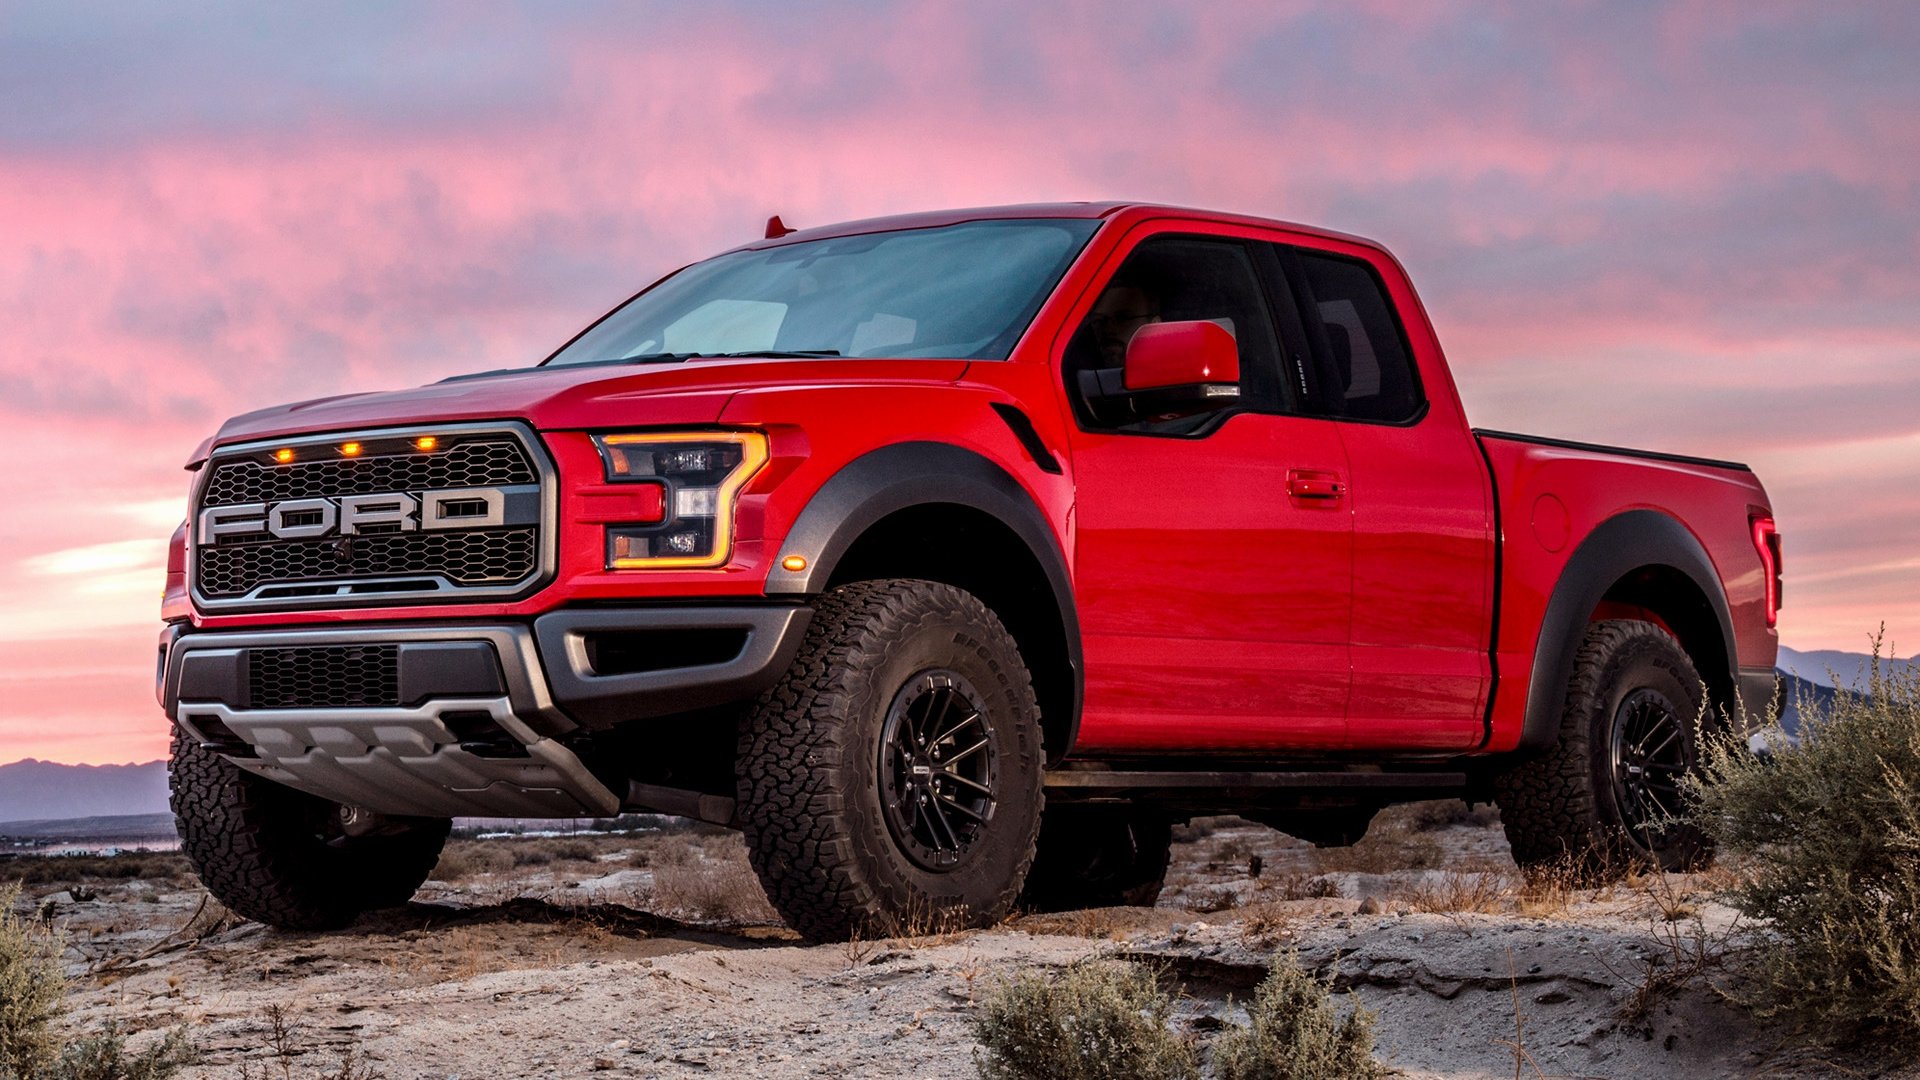 2019 Ford F 150 Raptor Supercab Hd Wallpaper Background Image 1920x1080